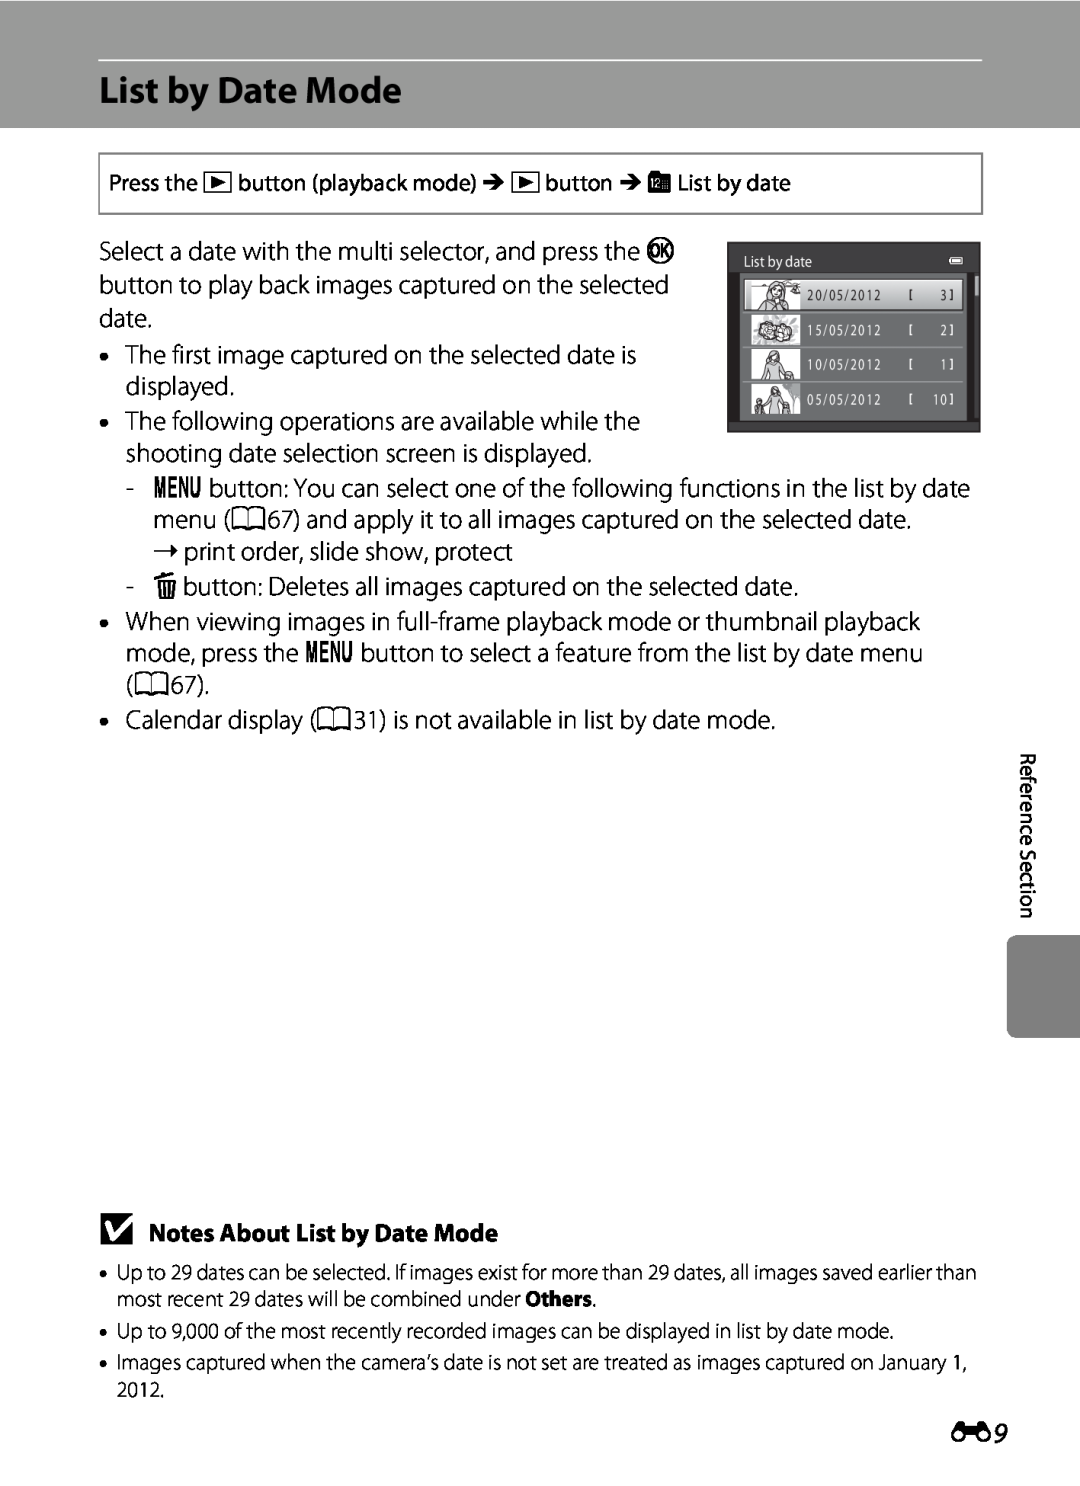 Nikon S2600 manual B Notes About List by Date Mode 